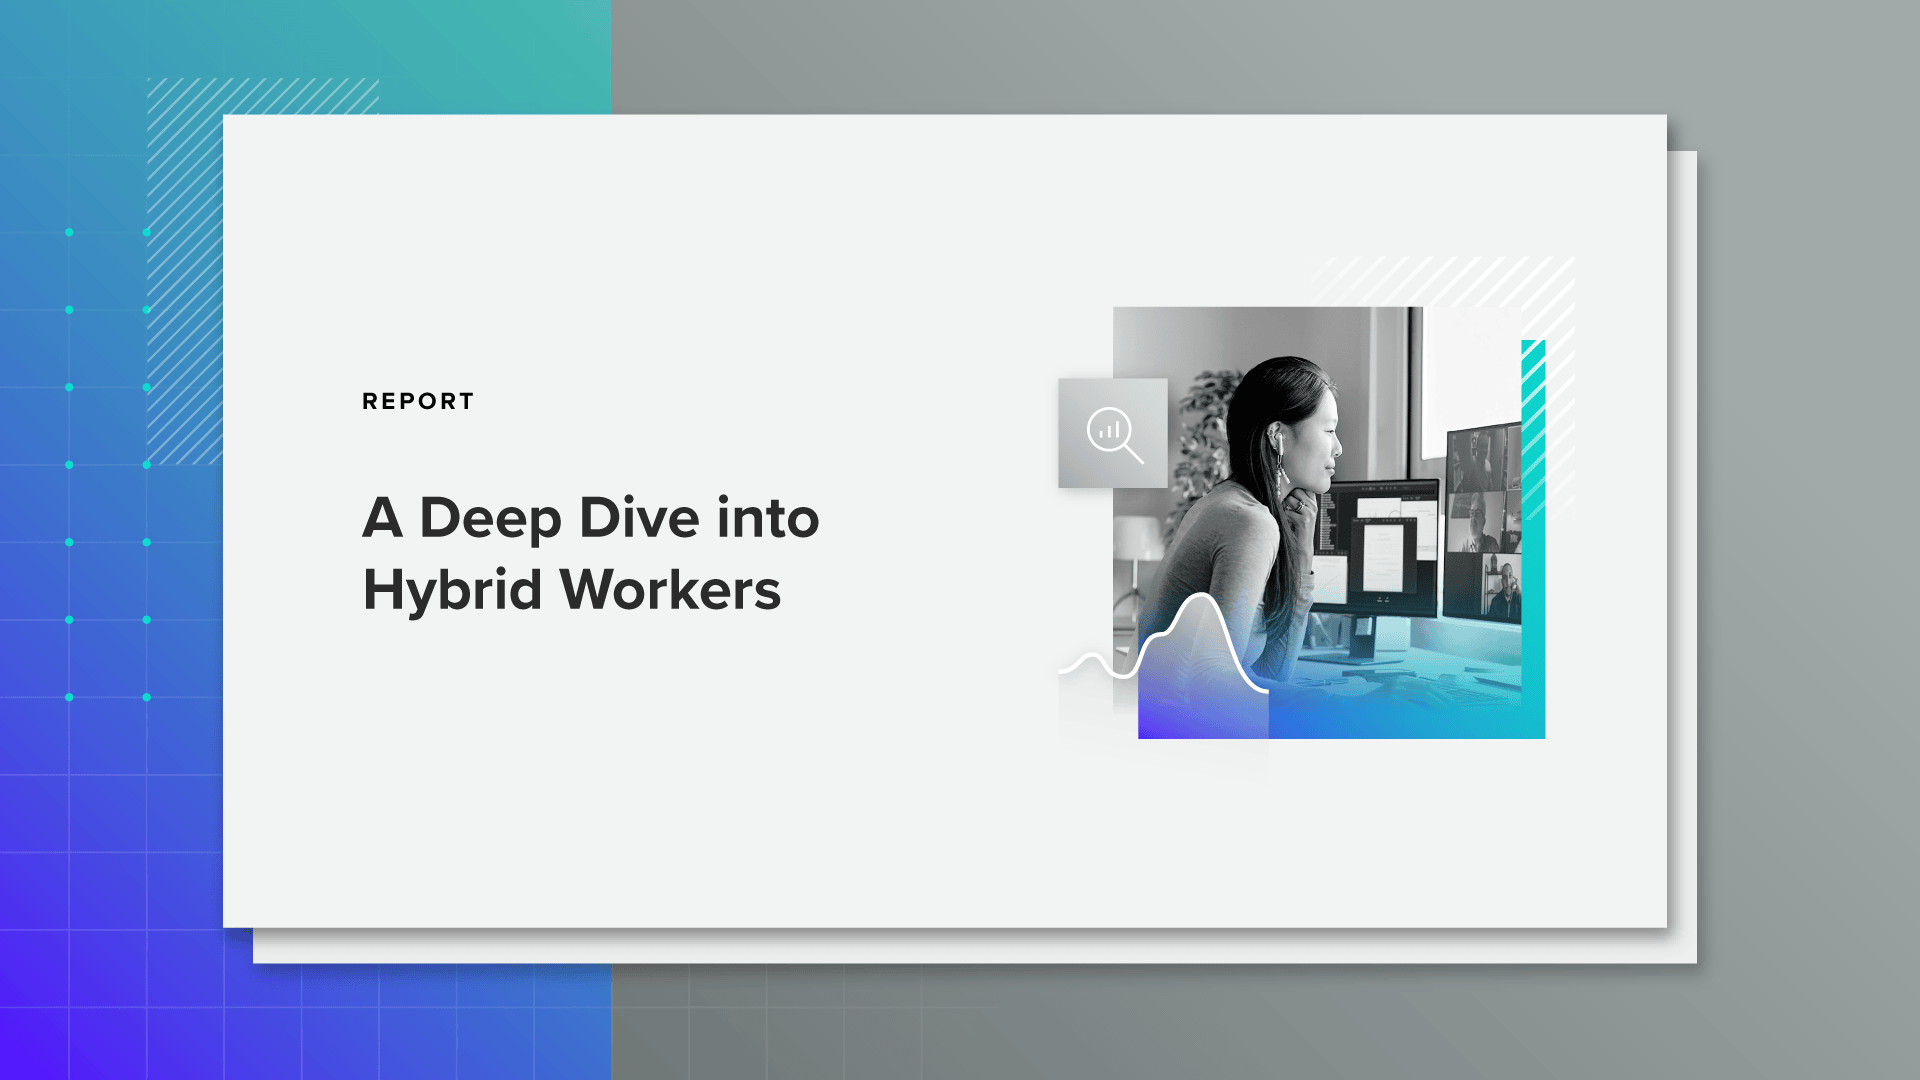 Download the Report: A Deep Dive into Hybrid Workers